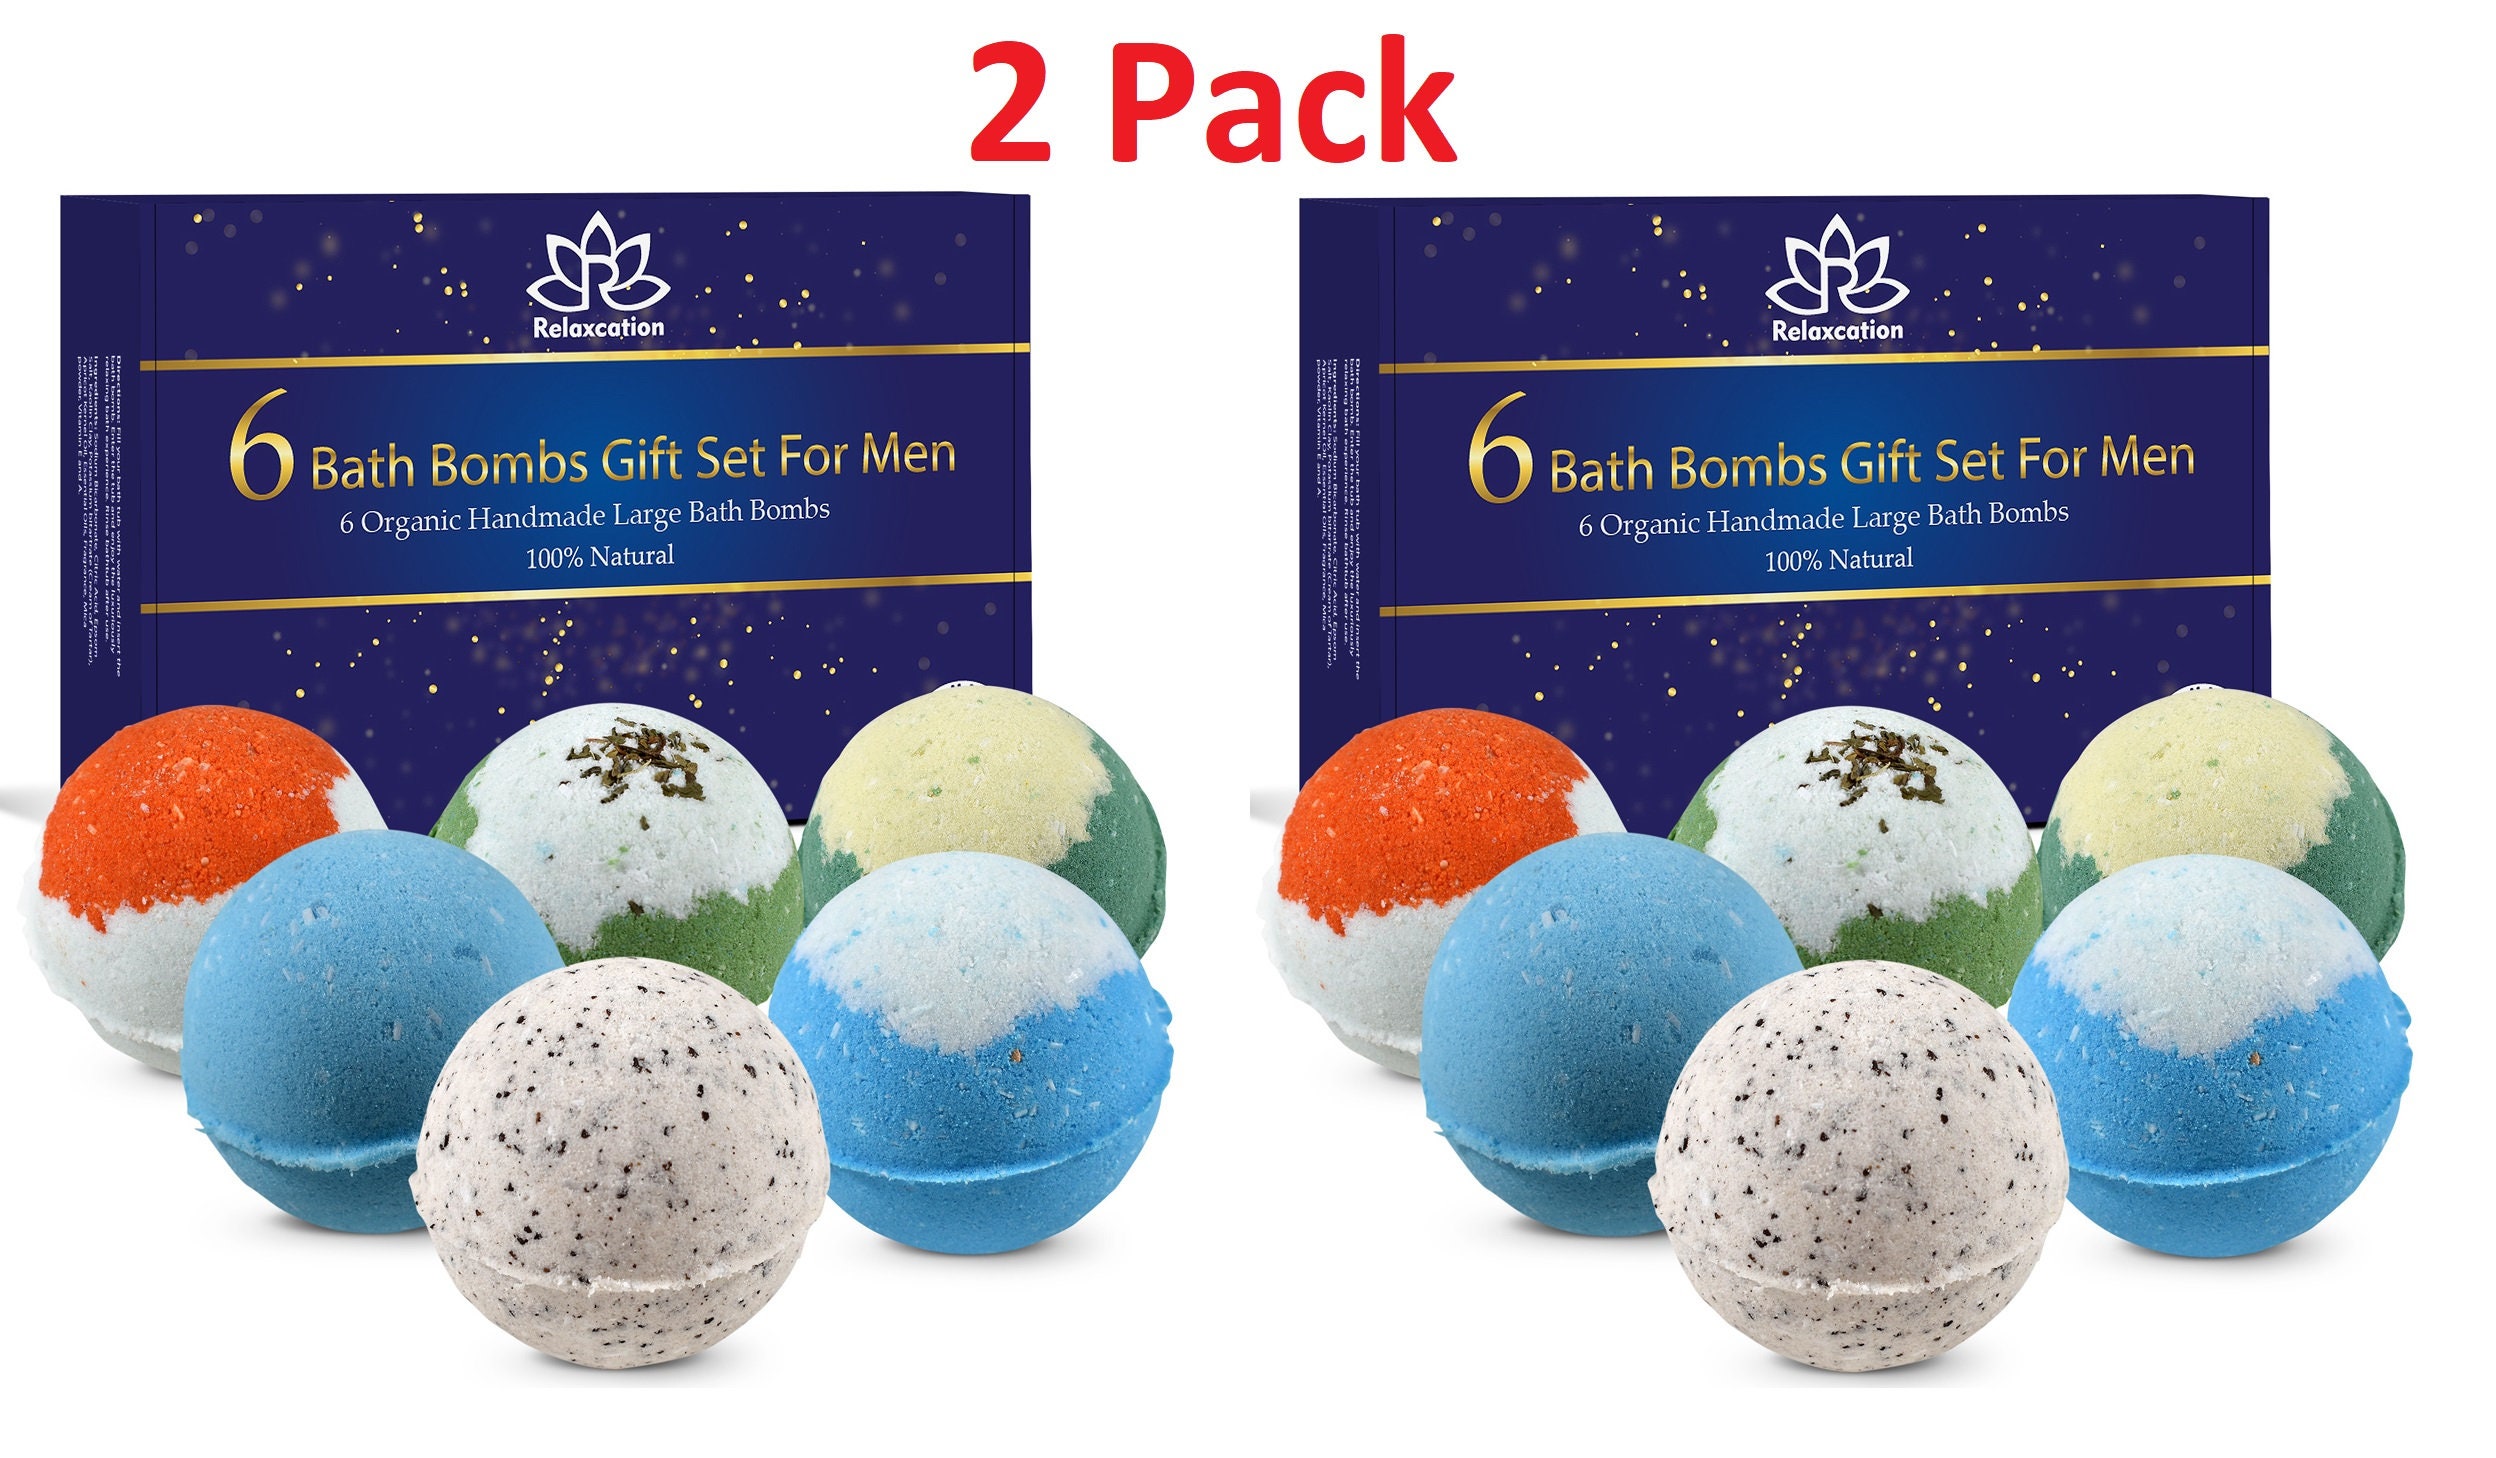 It's Just - Citric Acid, Food Grade, Non-GMO, Bath Bombs (6 Ounces) 6 Ounce  (Pack of 1)